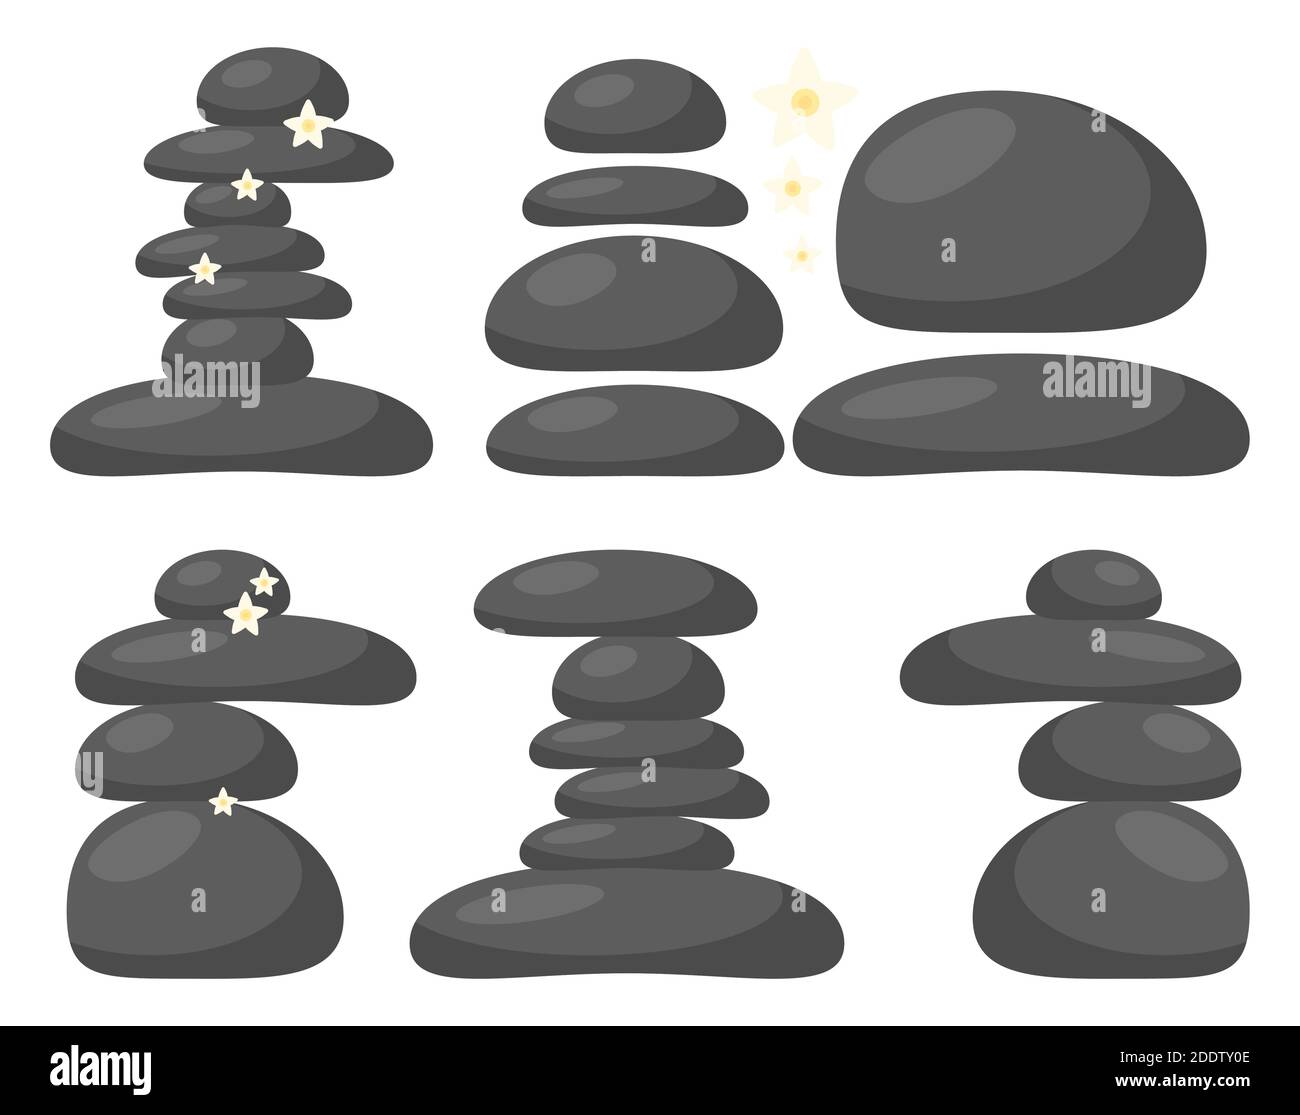 Spa stones set isolated on white background. Massage pebble collection for wellness therapy. Cartoon element of stack hot stone. Oriental relaxation r Stock Vector